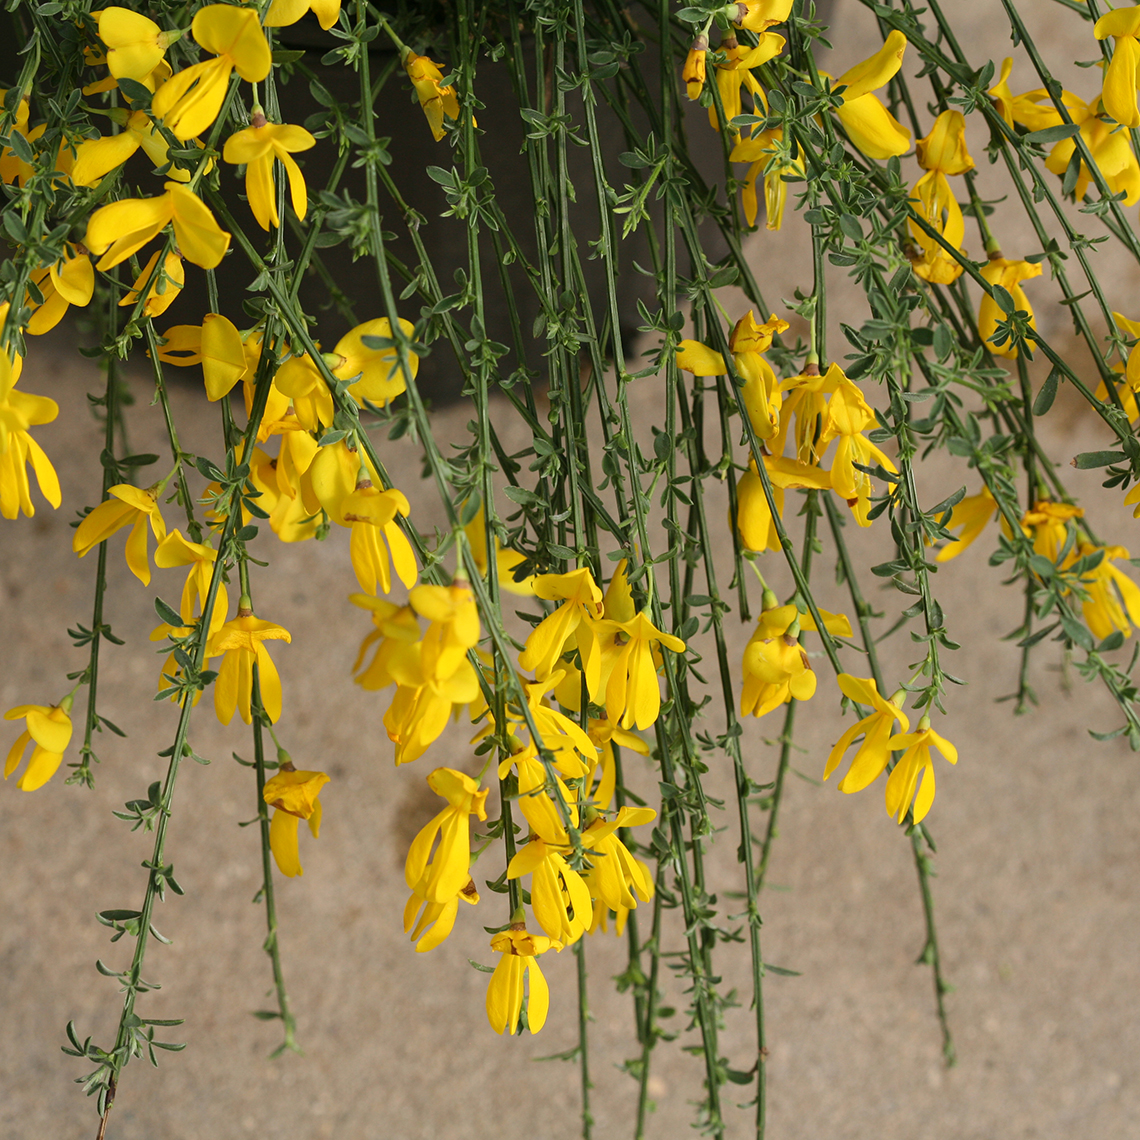 Draping branches of Sister Golden Hair Cytisus with yellow flowers and small foliage